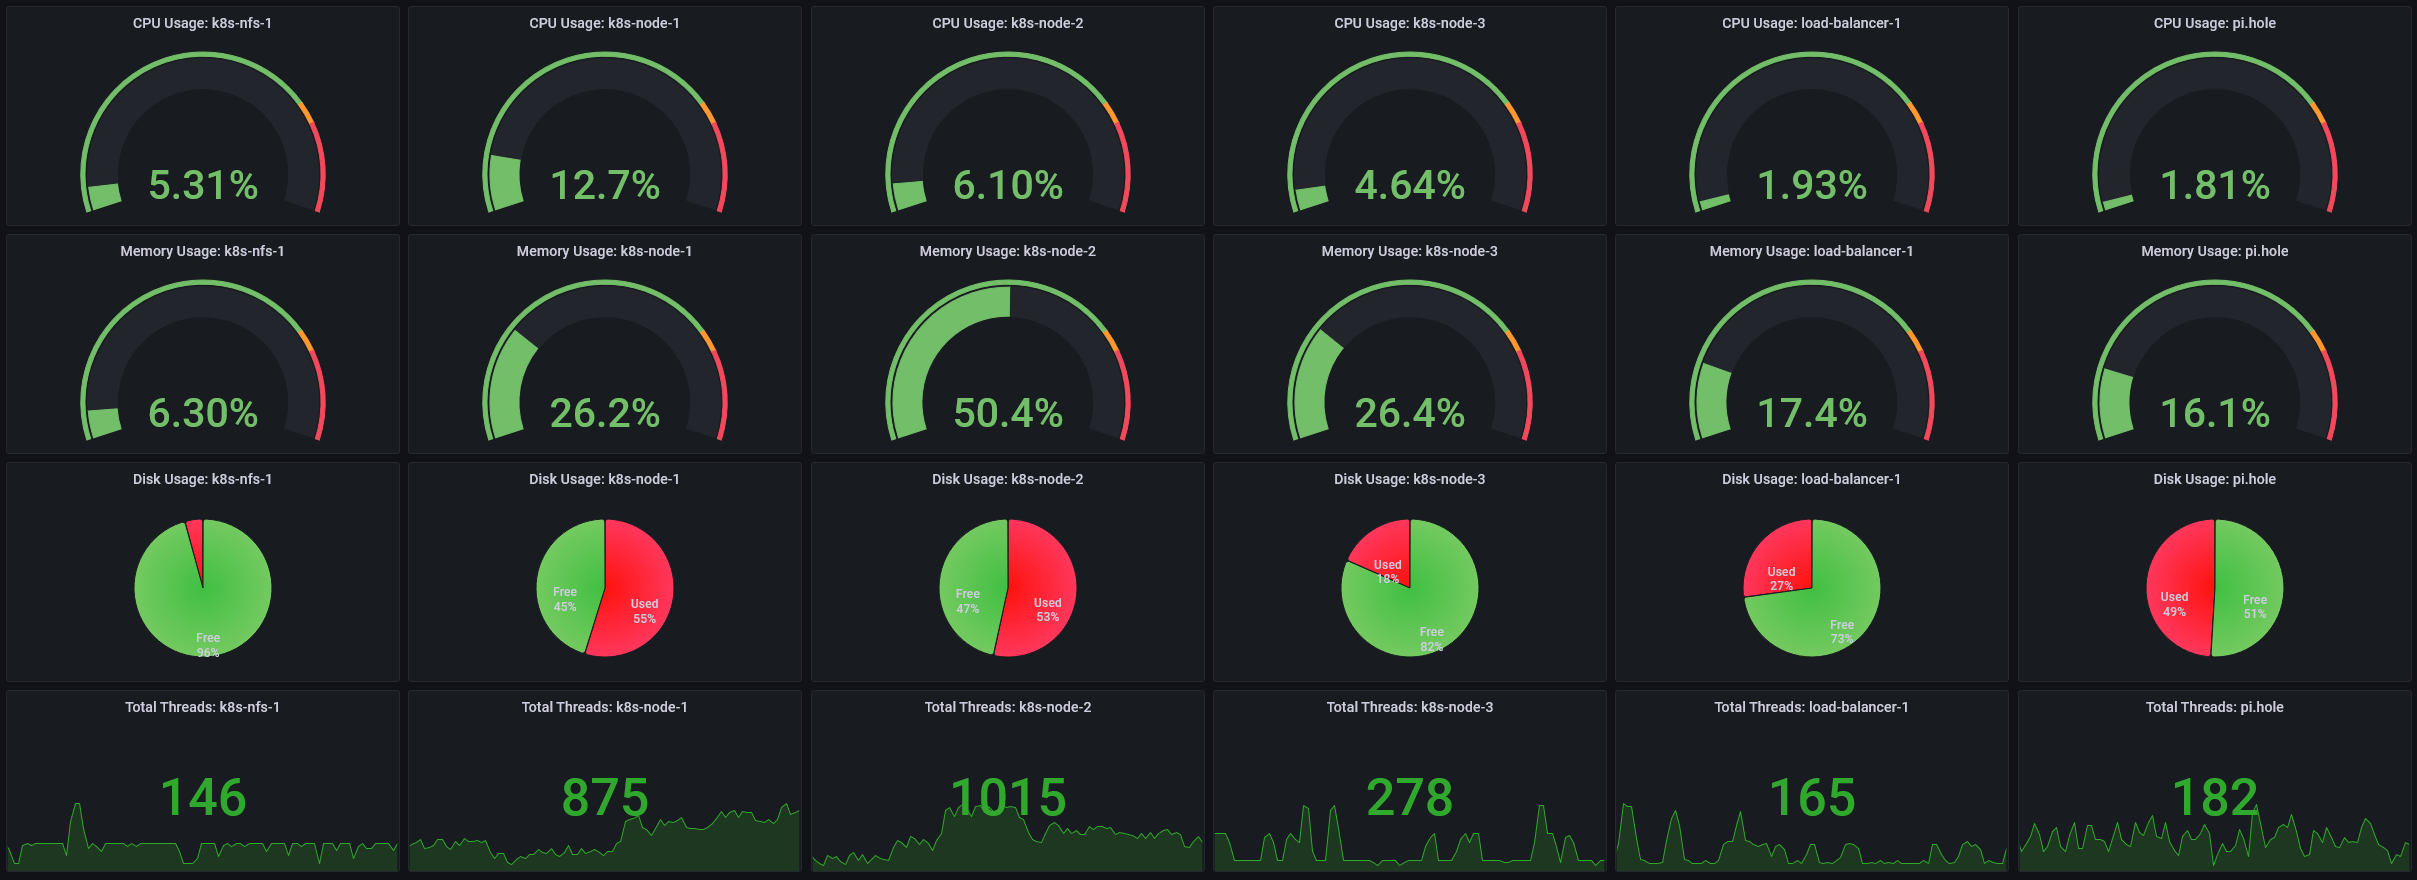 Snippet of my main Grafana Dashboard with the new hosts